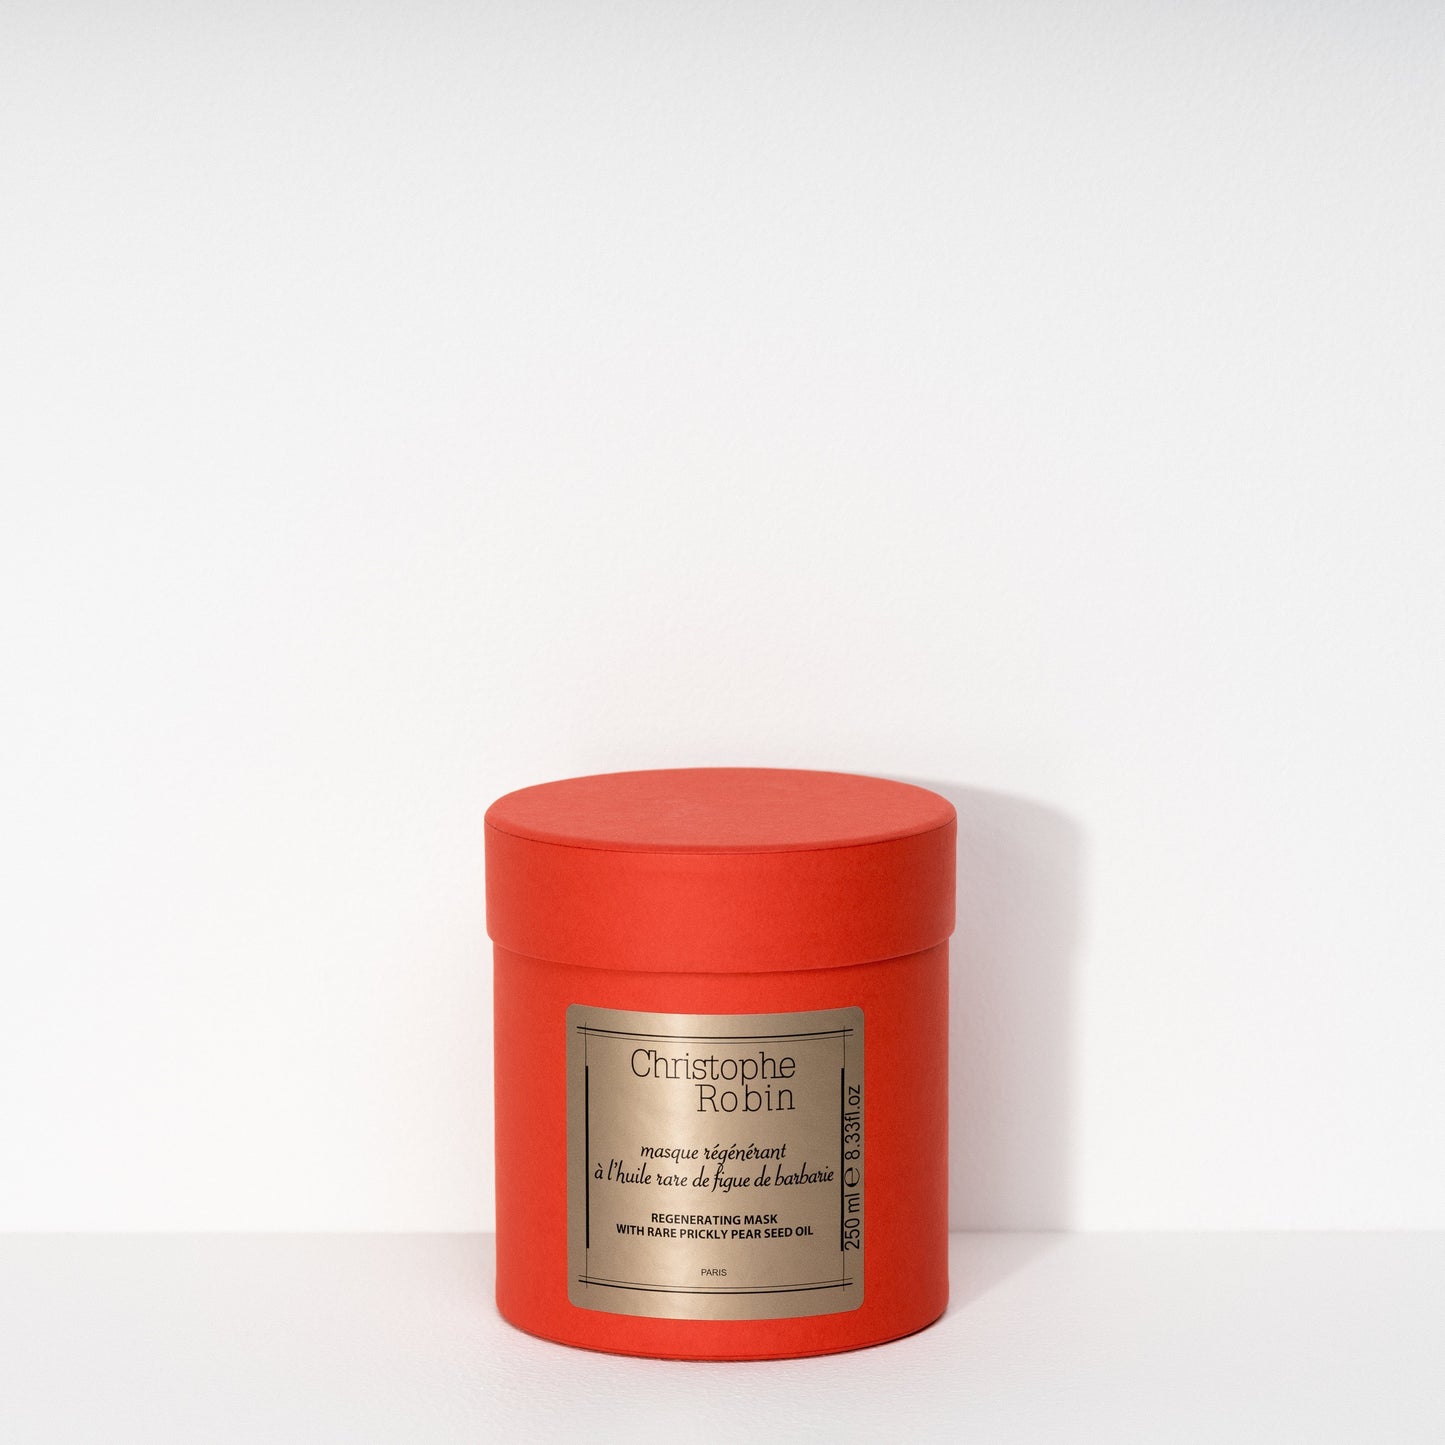 CHRISTOPHE ROBIN CONDITIONER HAIR MASK Regenerating Mask With Rare Prickly Pear Seed Oil